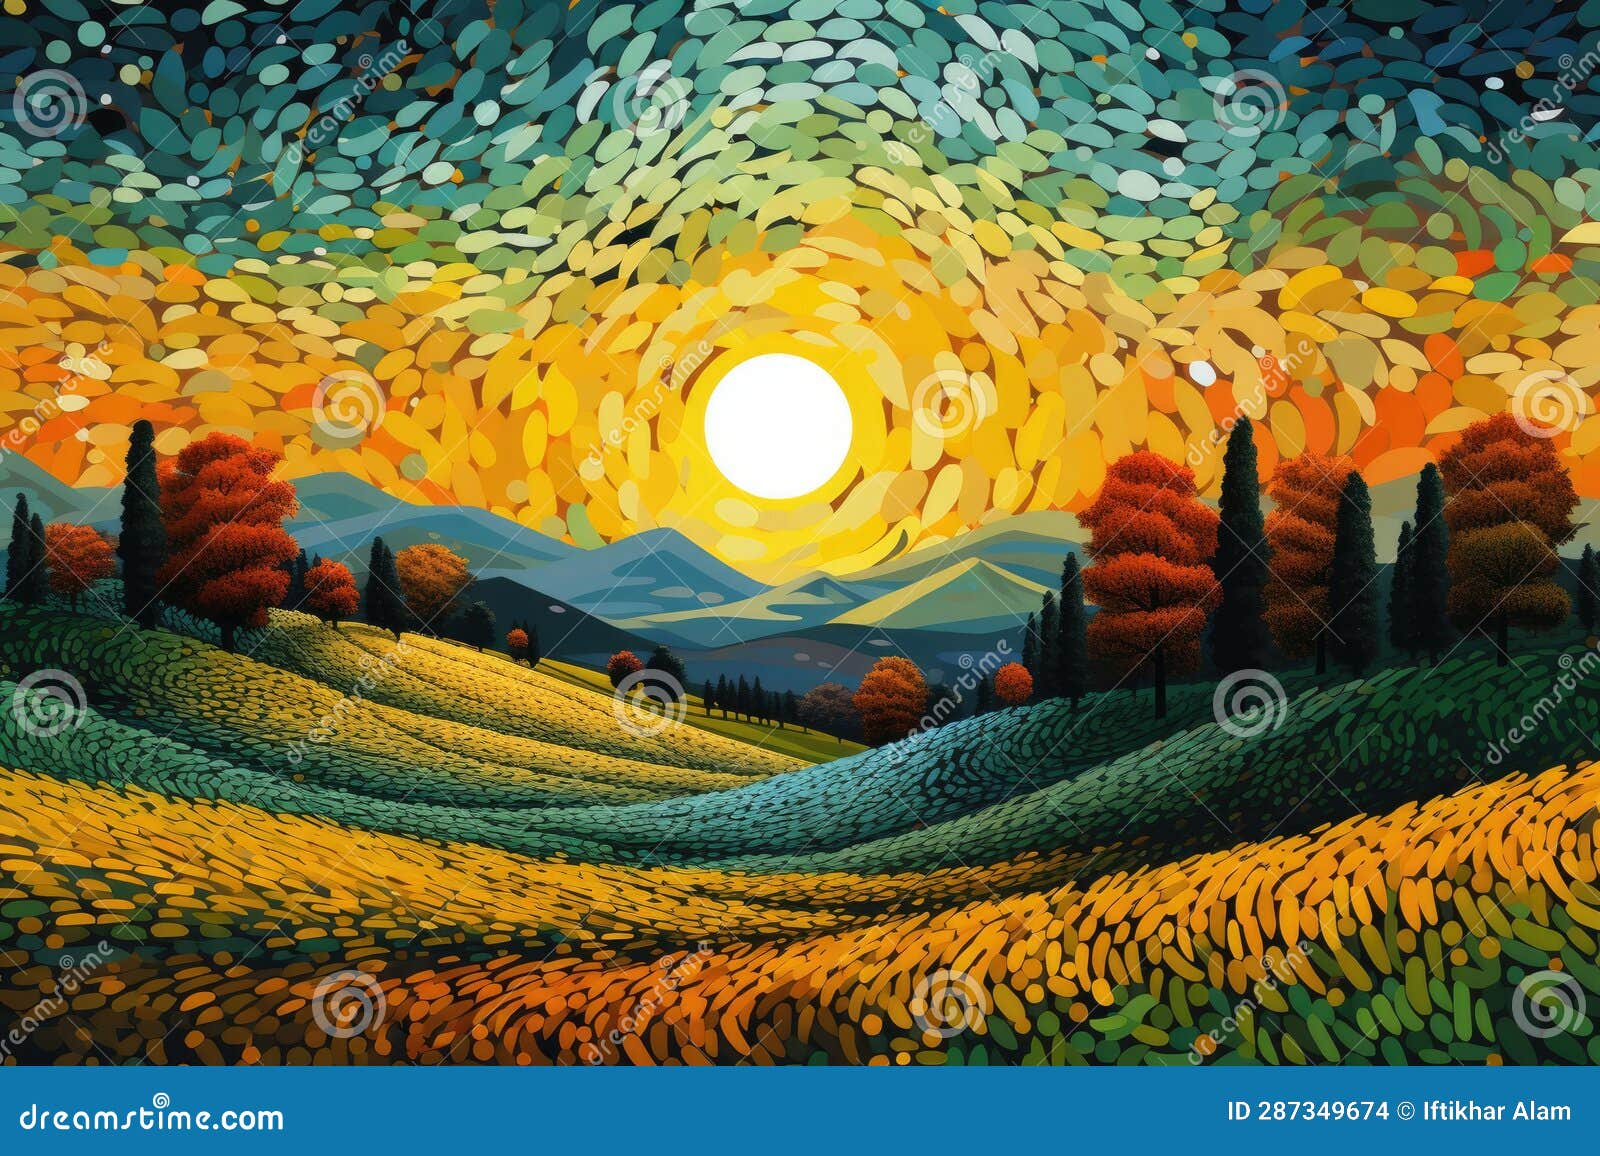 Colorful Autumn Landscape with Hills, Trees and Sun Illustration. a ...